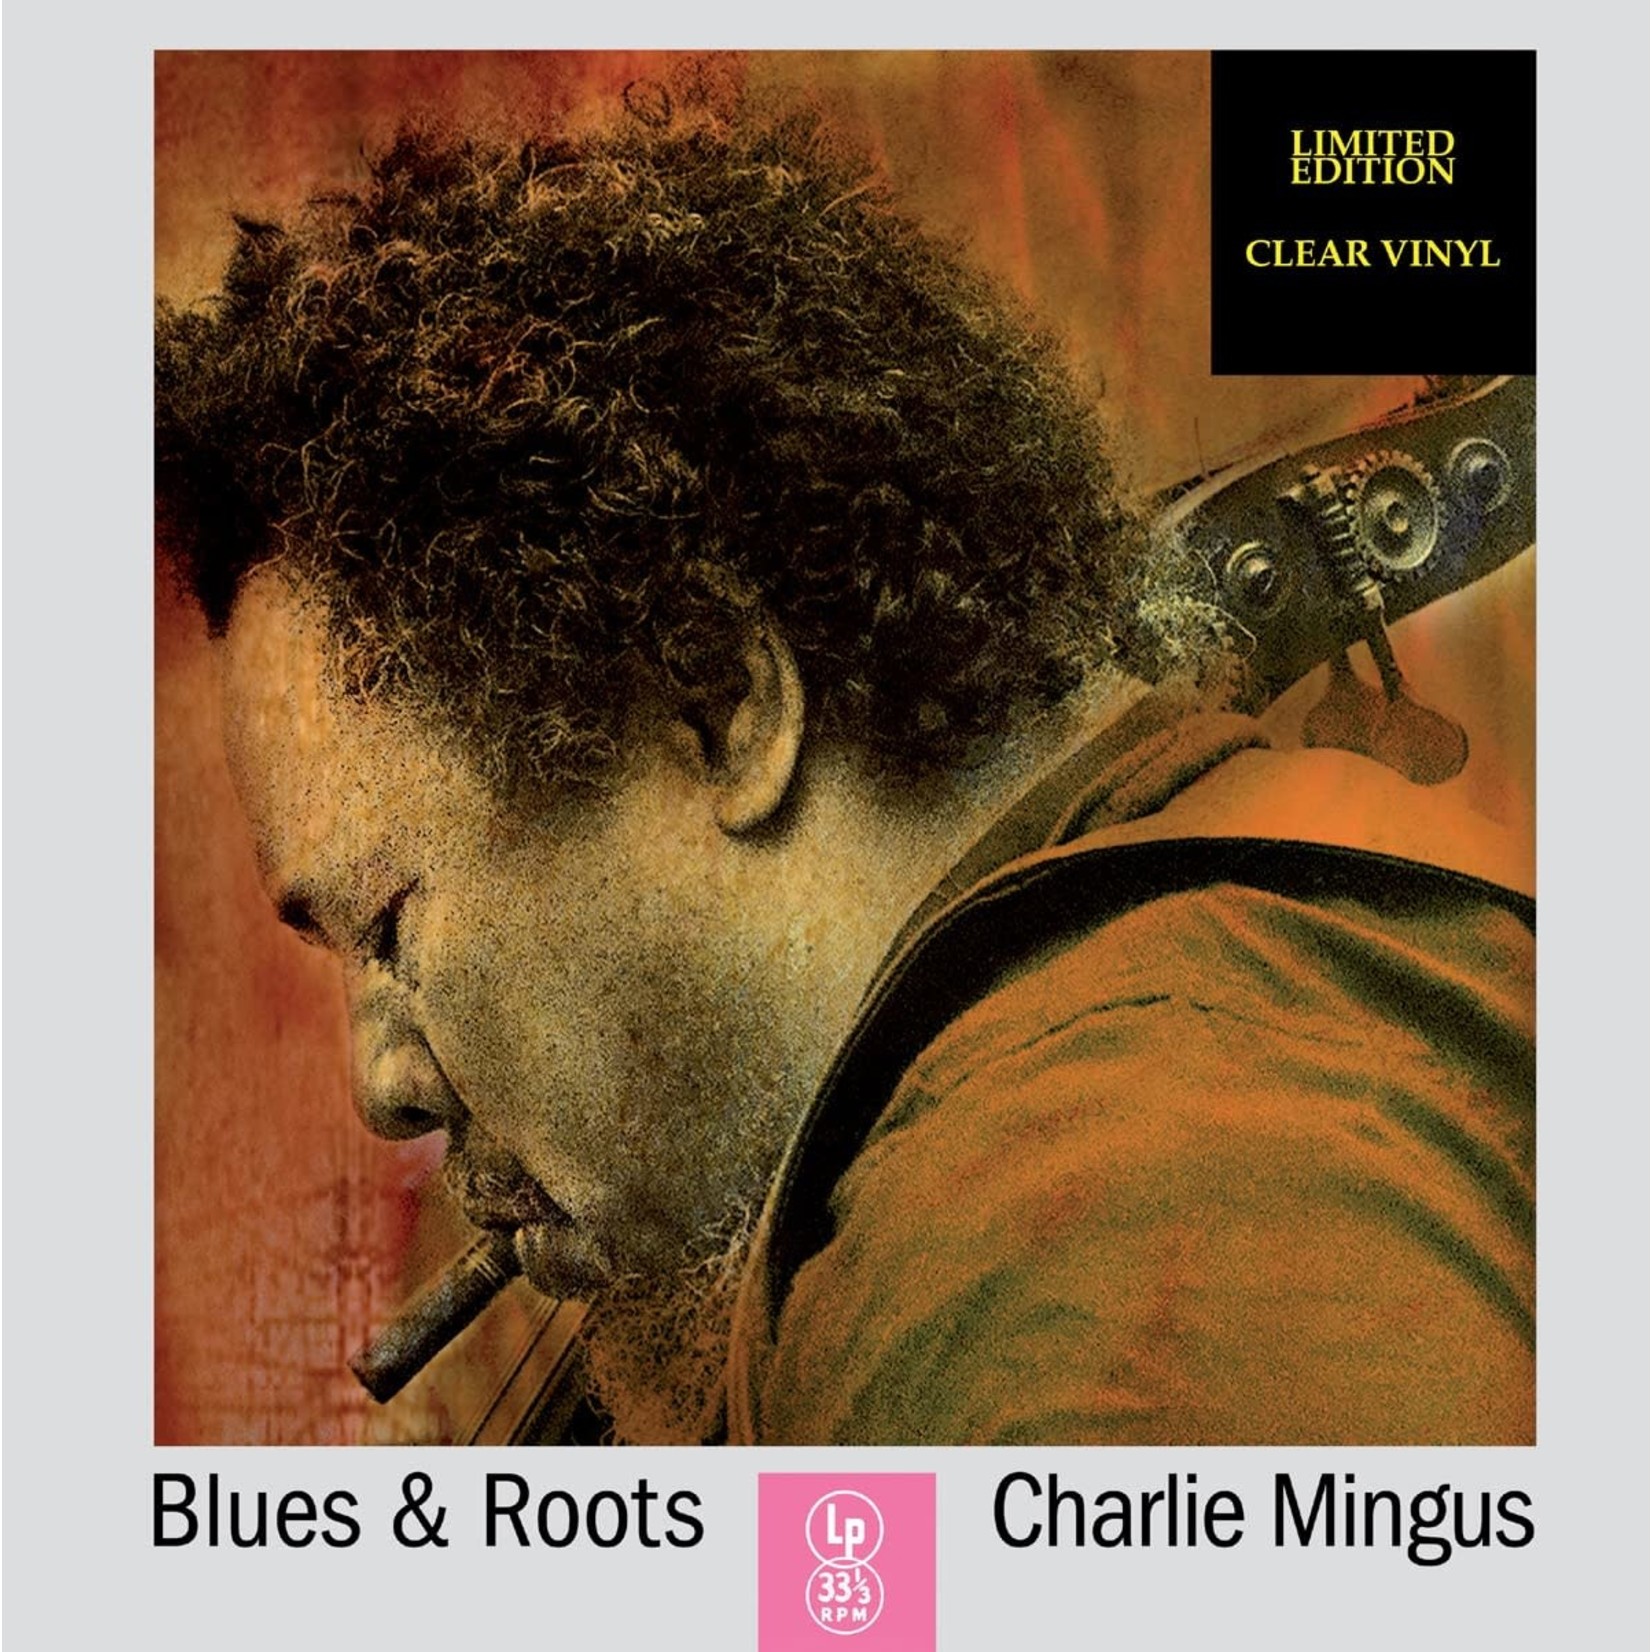 [New] Charles Mingus - Blues & Roots (clear vinyl)